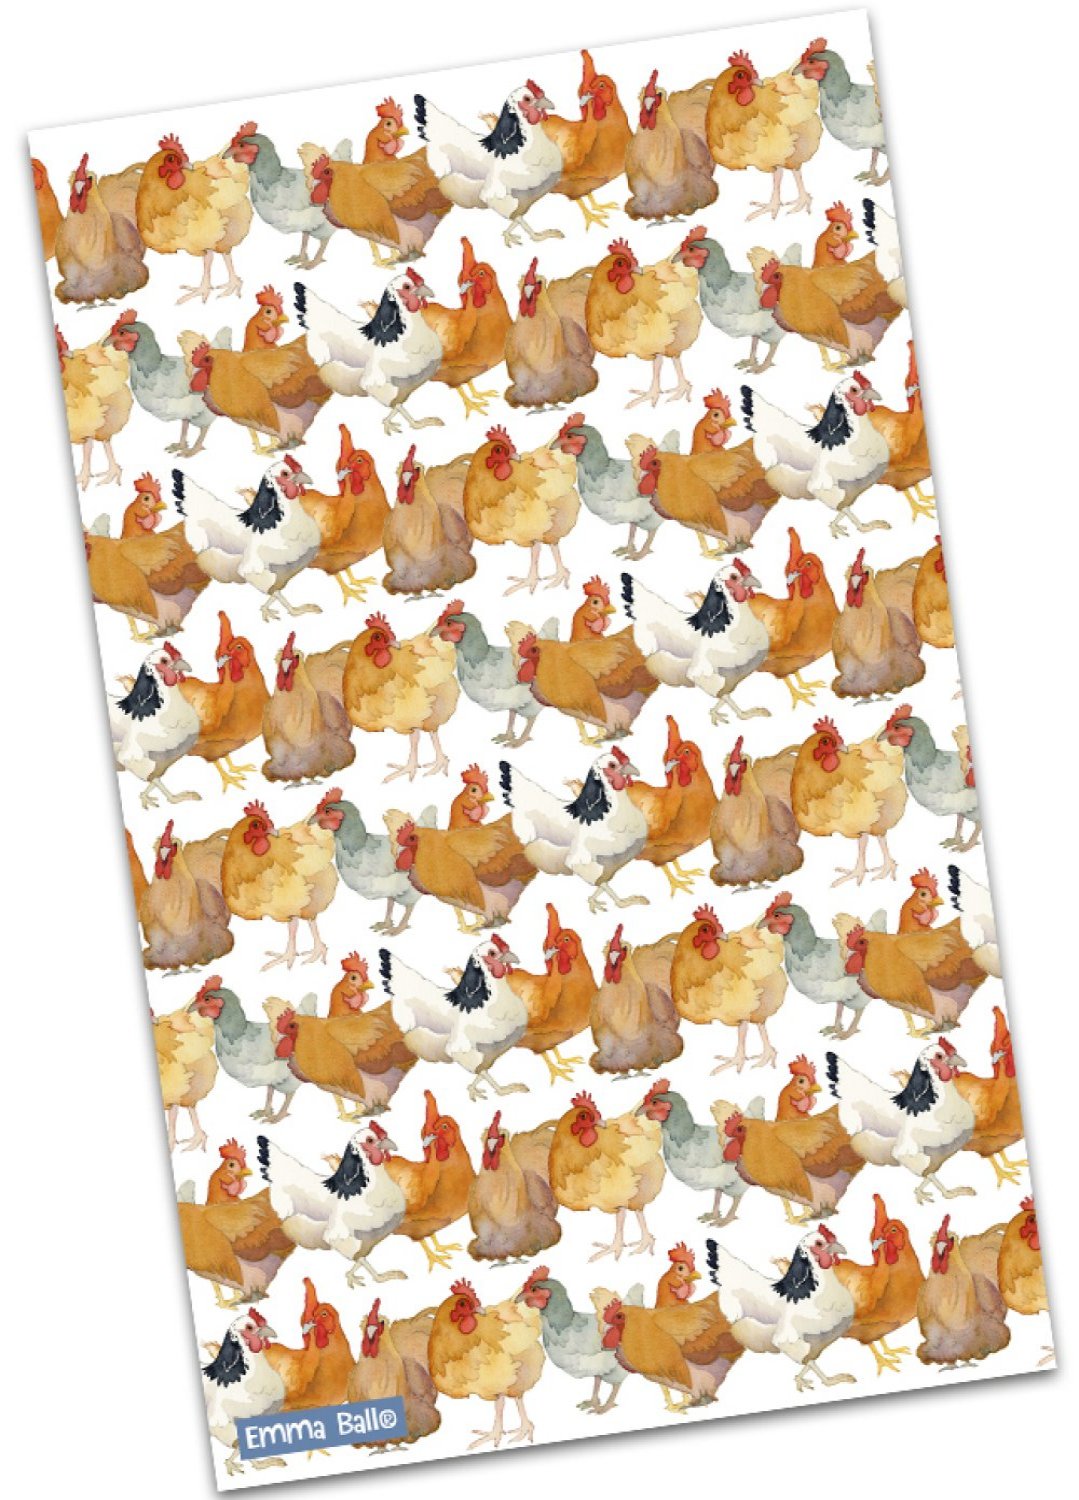 Emma Ball "Chickens", Pure cotton tea towel. Printed in the UK.